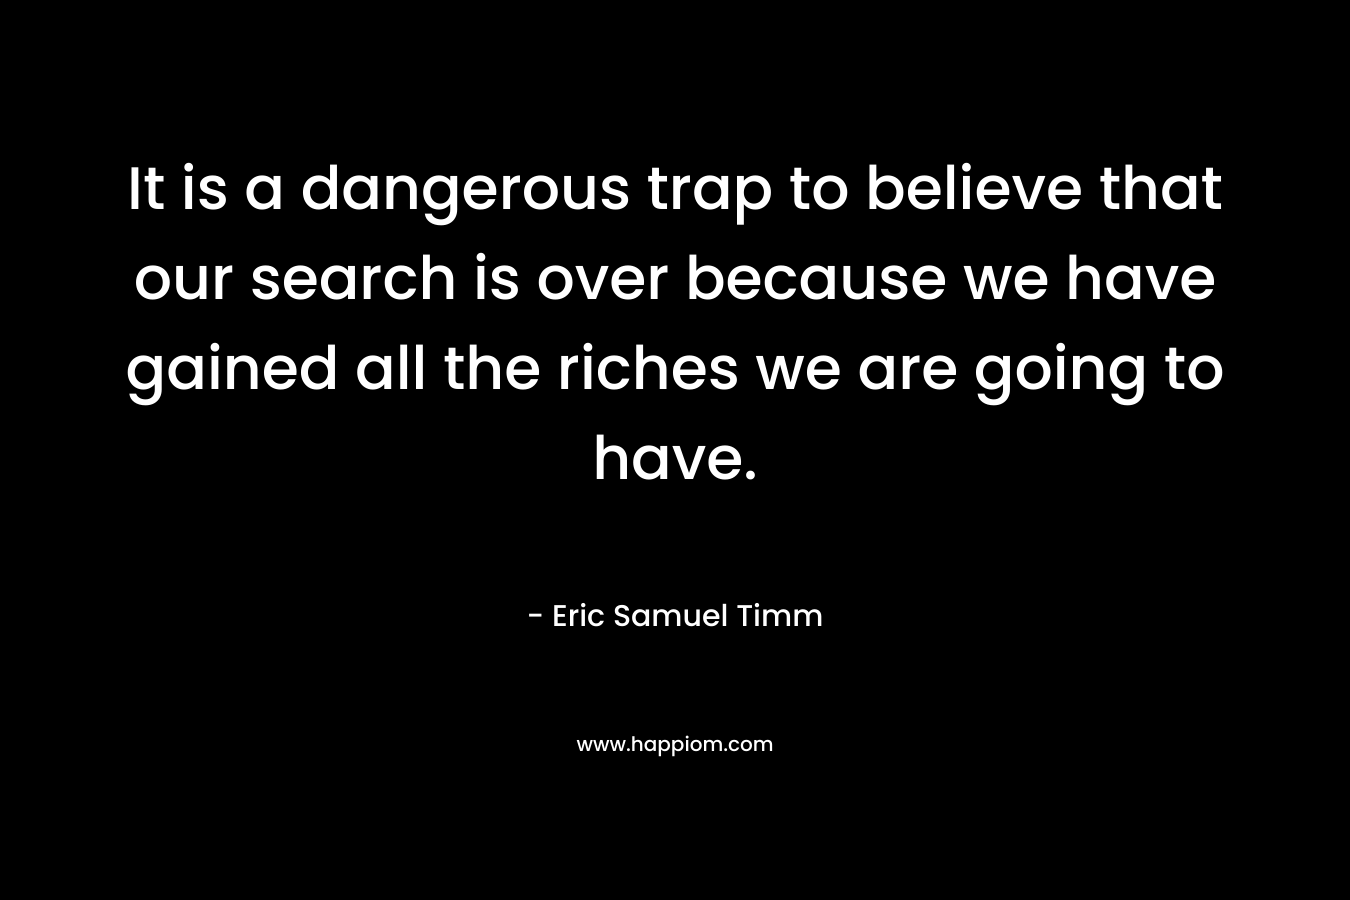 It is a dangerous trap to believe that our search is over because we have gained all the riches we are going to have.